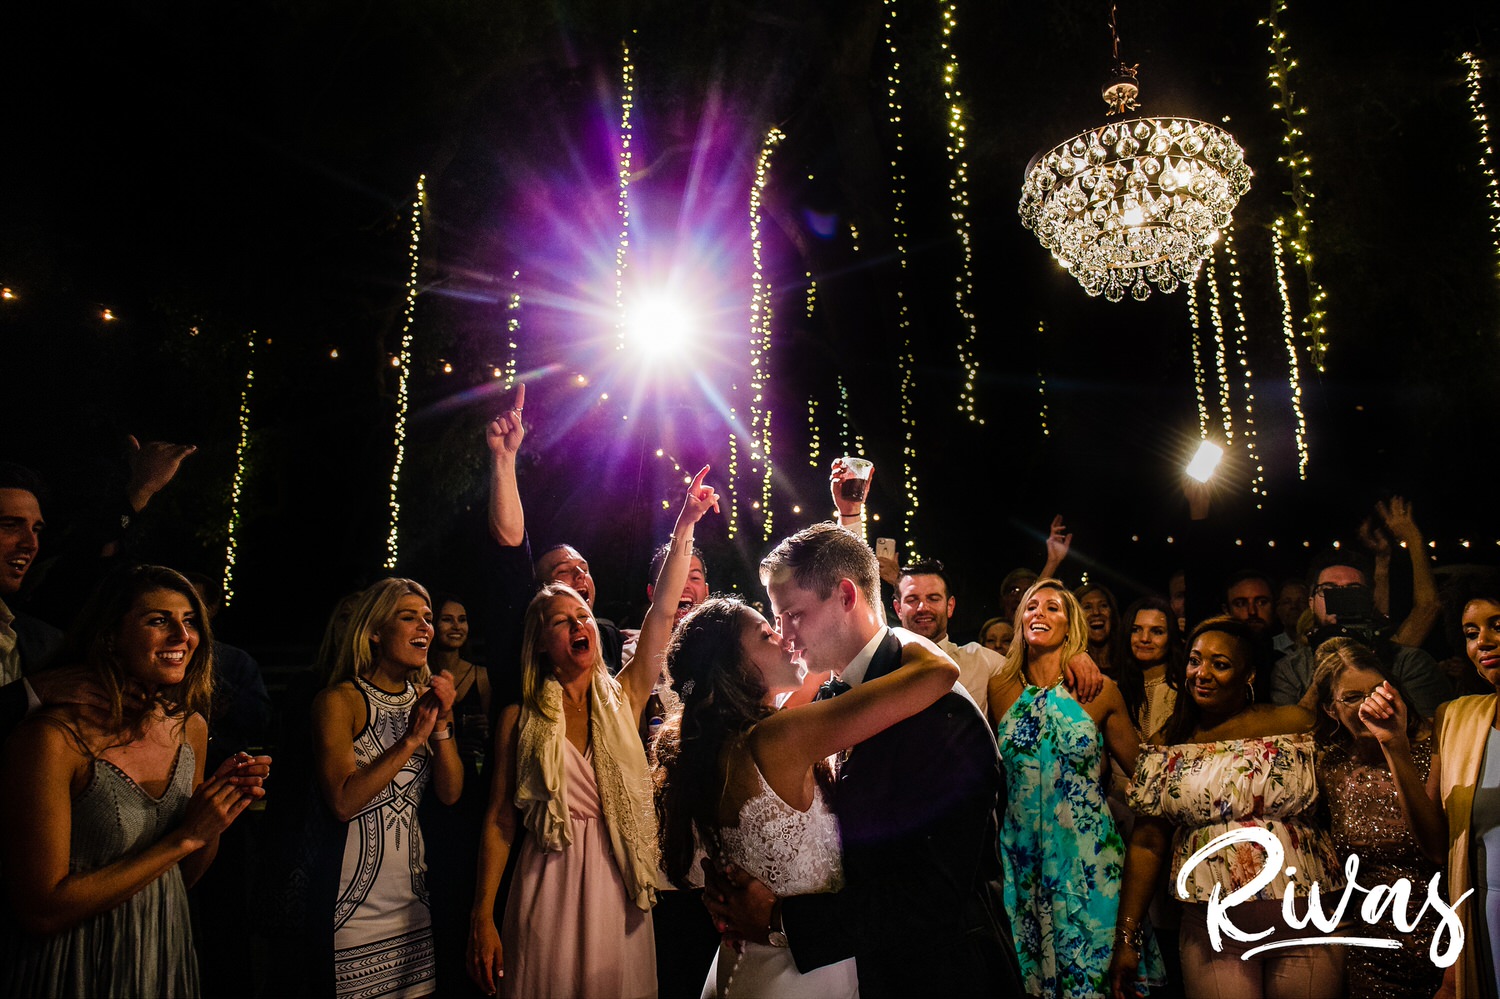 Saddlerock Ranch Summer Wedding | Destination Wedding Photographers | Rivas | A candid image of a bride and groom dancing under a chandelier and ropes of twinkly lights while their friends and family cheer them on during their wedding reception at Saddlerock Ranch in Malibu, CA. 